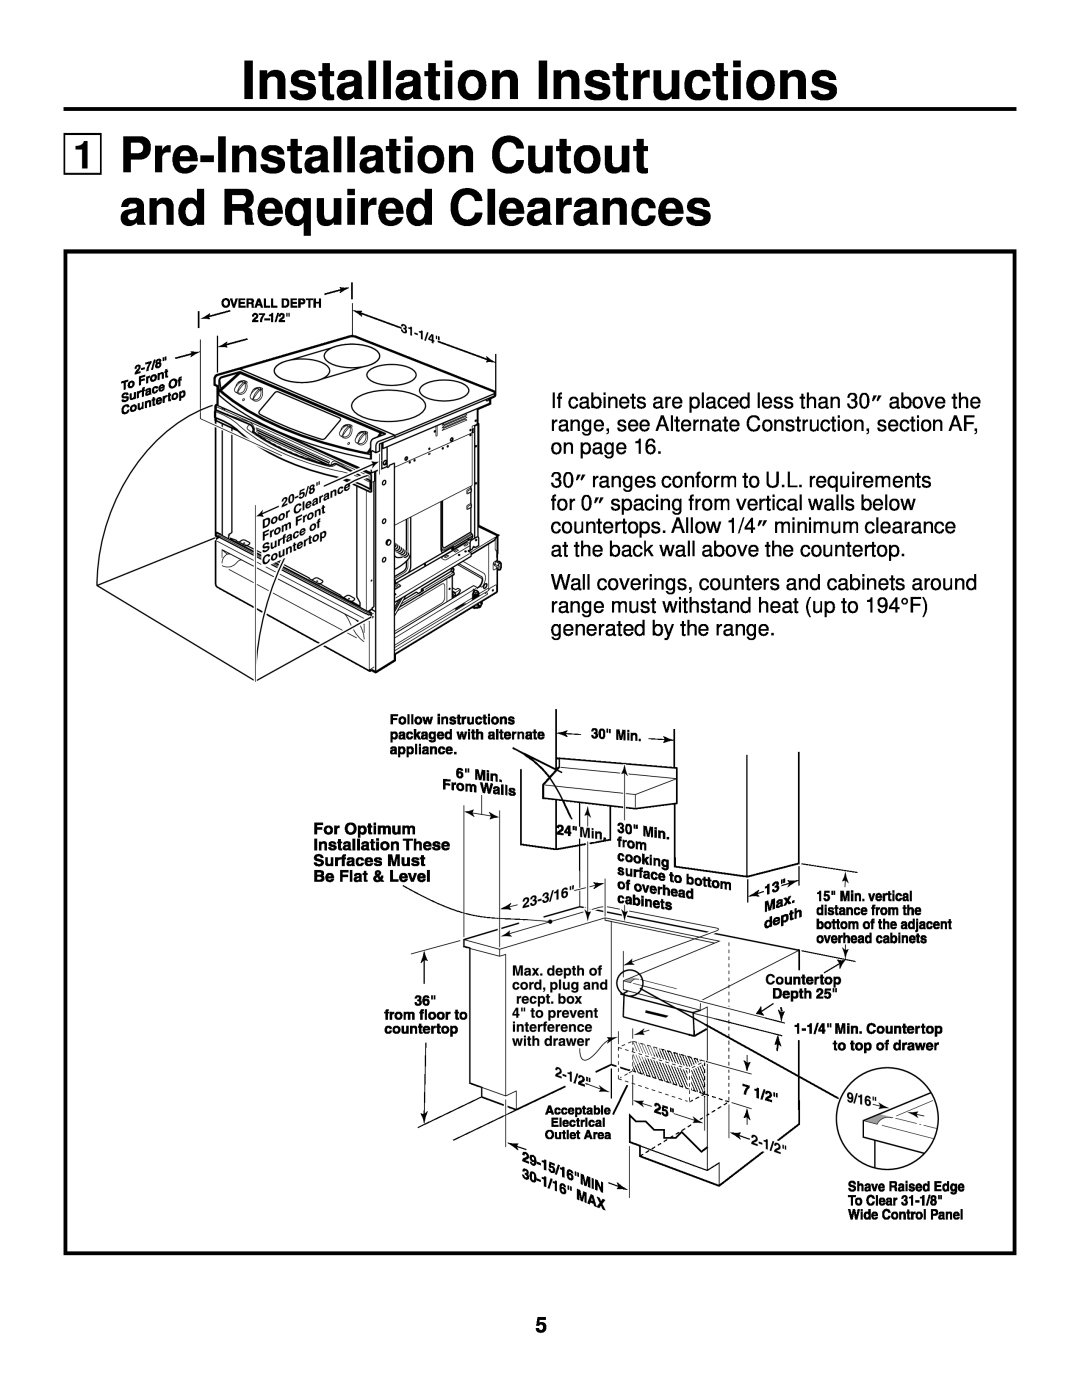 GE JS905 installation instructions Pre-Installation Cutout and Required Clearances, Installation Instructions 